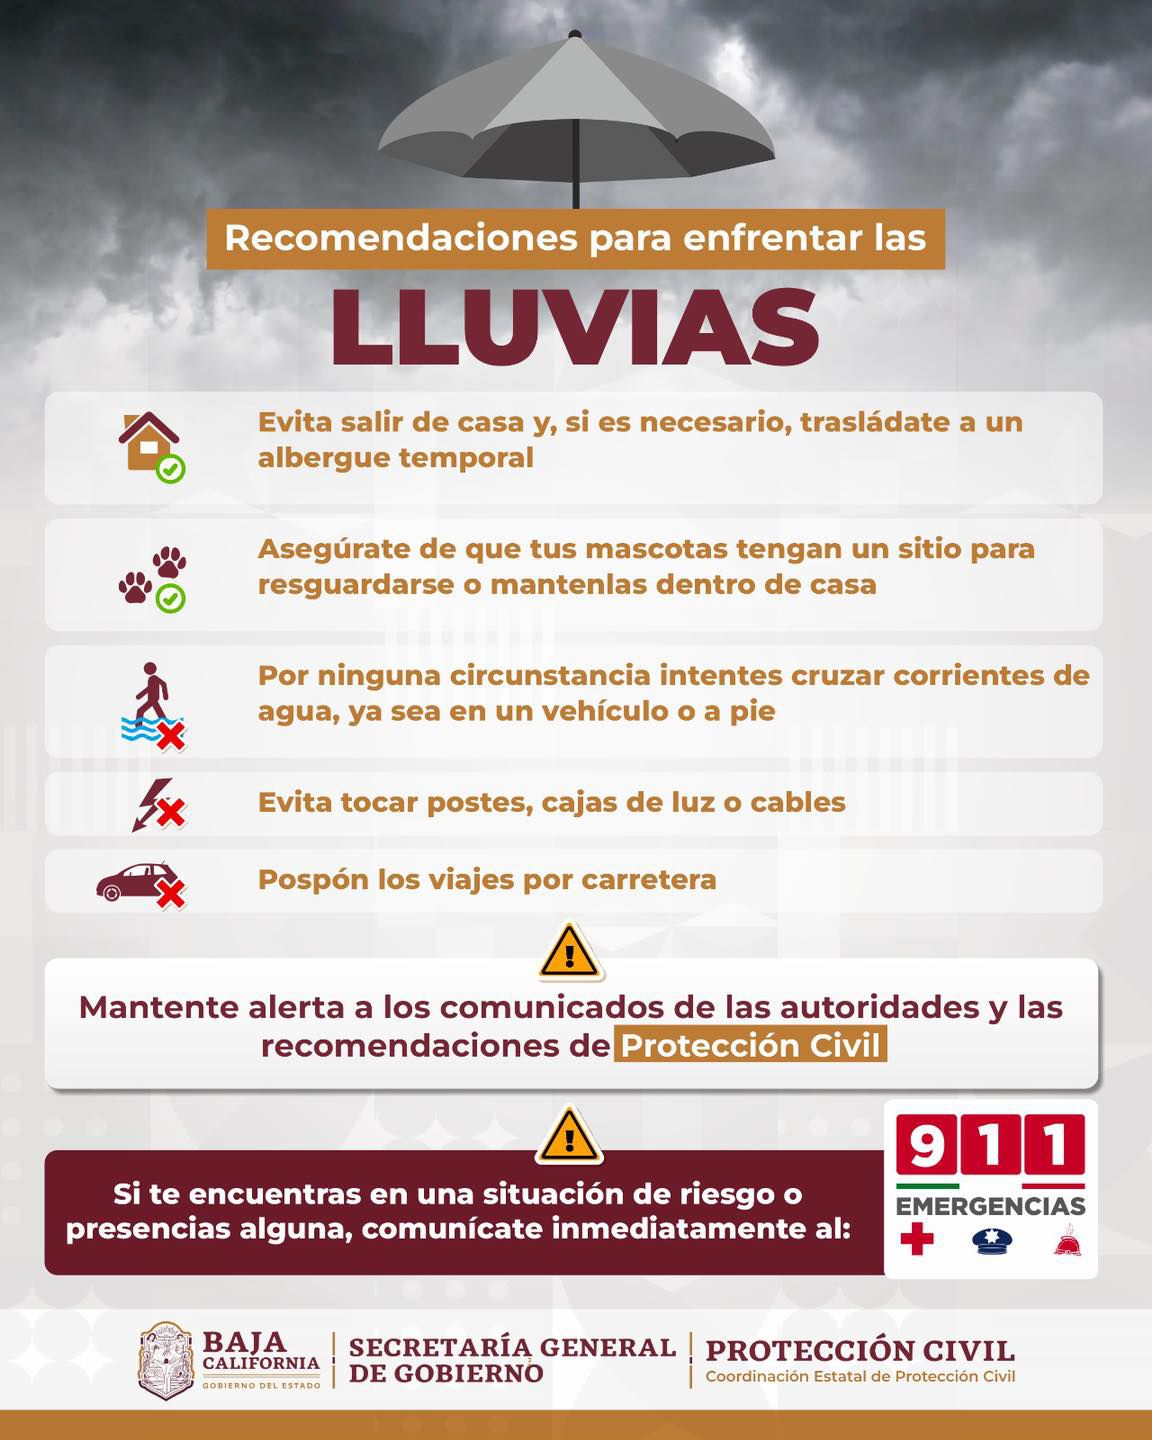 Civil Protection of Baja California presented recommendations to deal with the rains.  (BC Civil Protection)